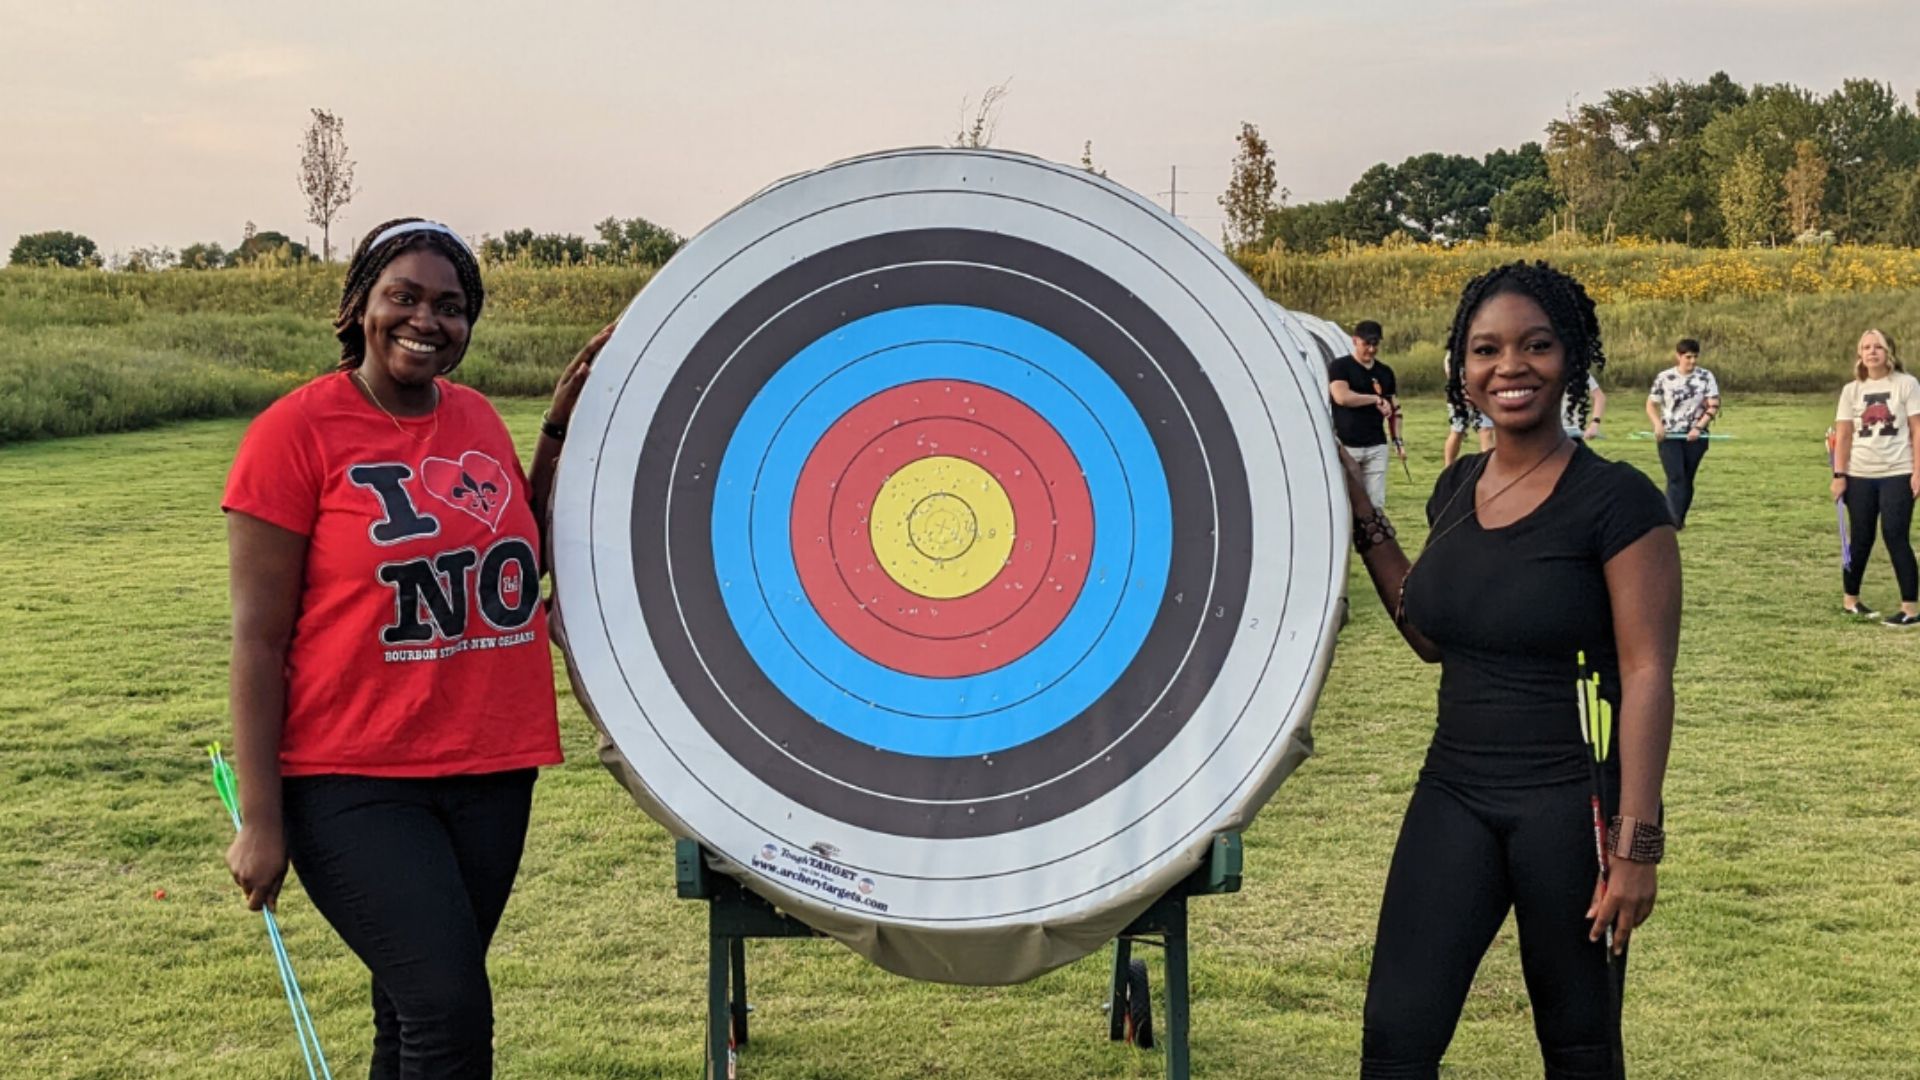 The Quiver Archery Range - Two ladies standing on side of archery target